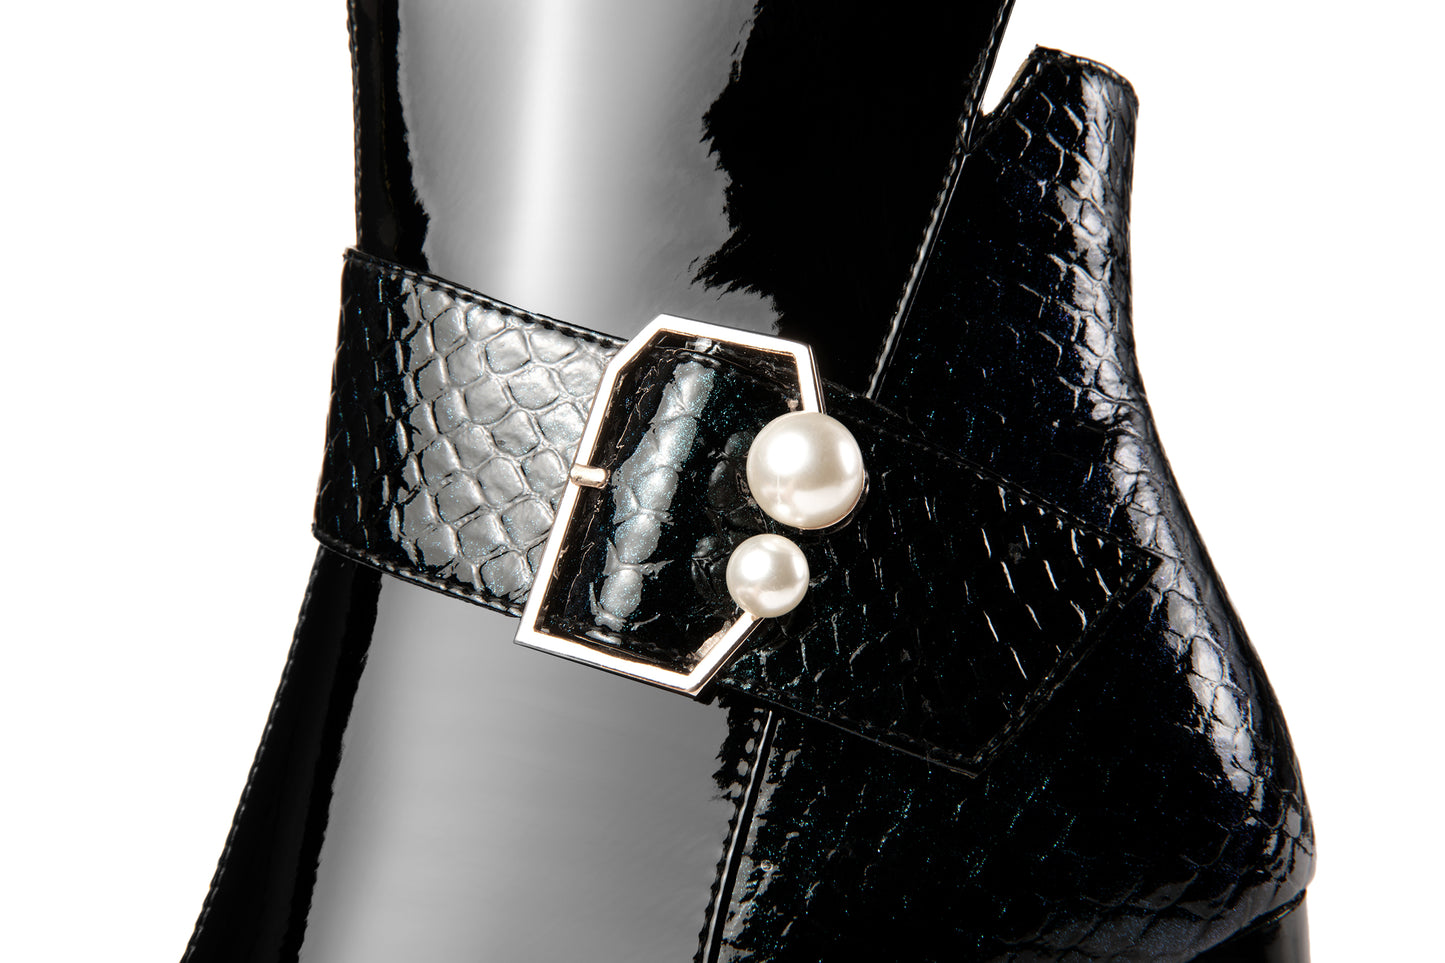 TinaCus Women's Patent Leather Handmade High Heel  Zip Up Ankle Boots with Pearl Buckle